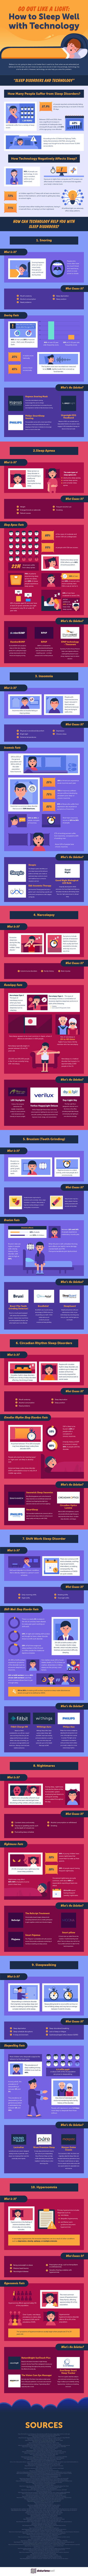 tired employees infographic